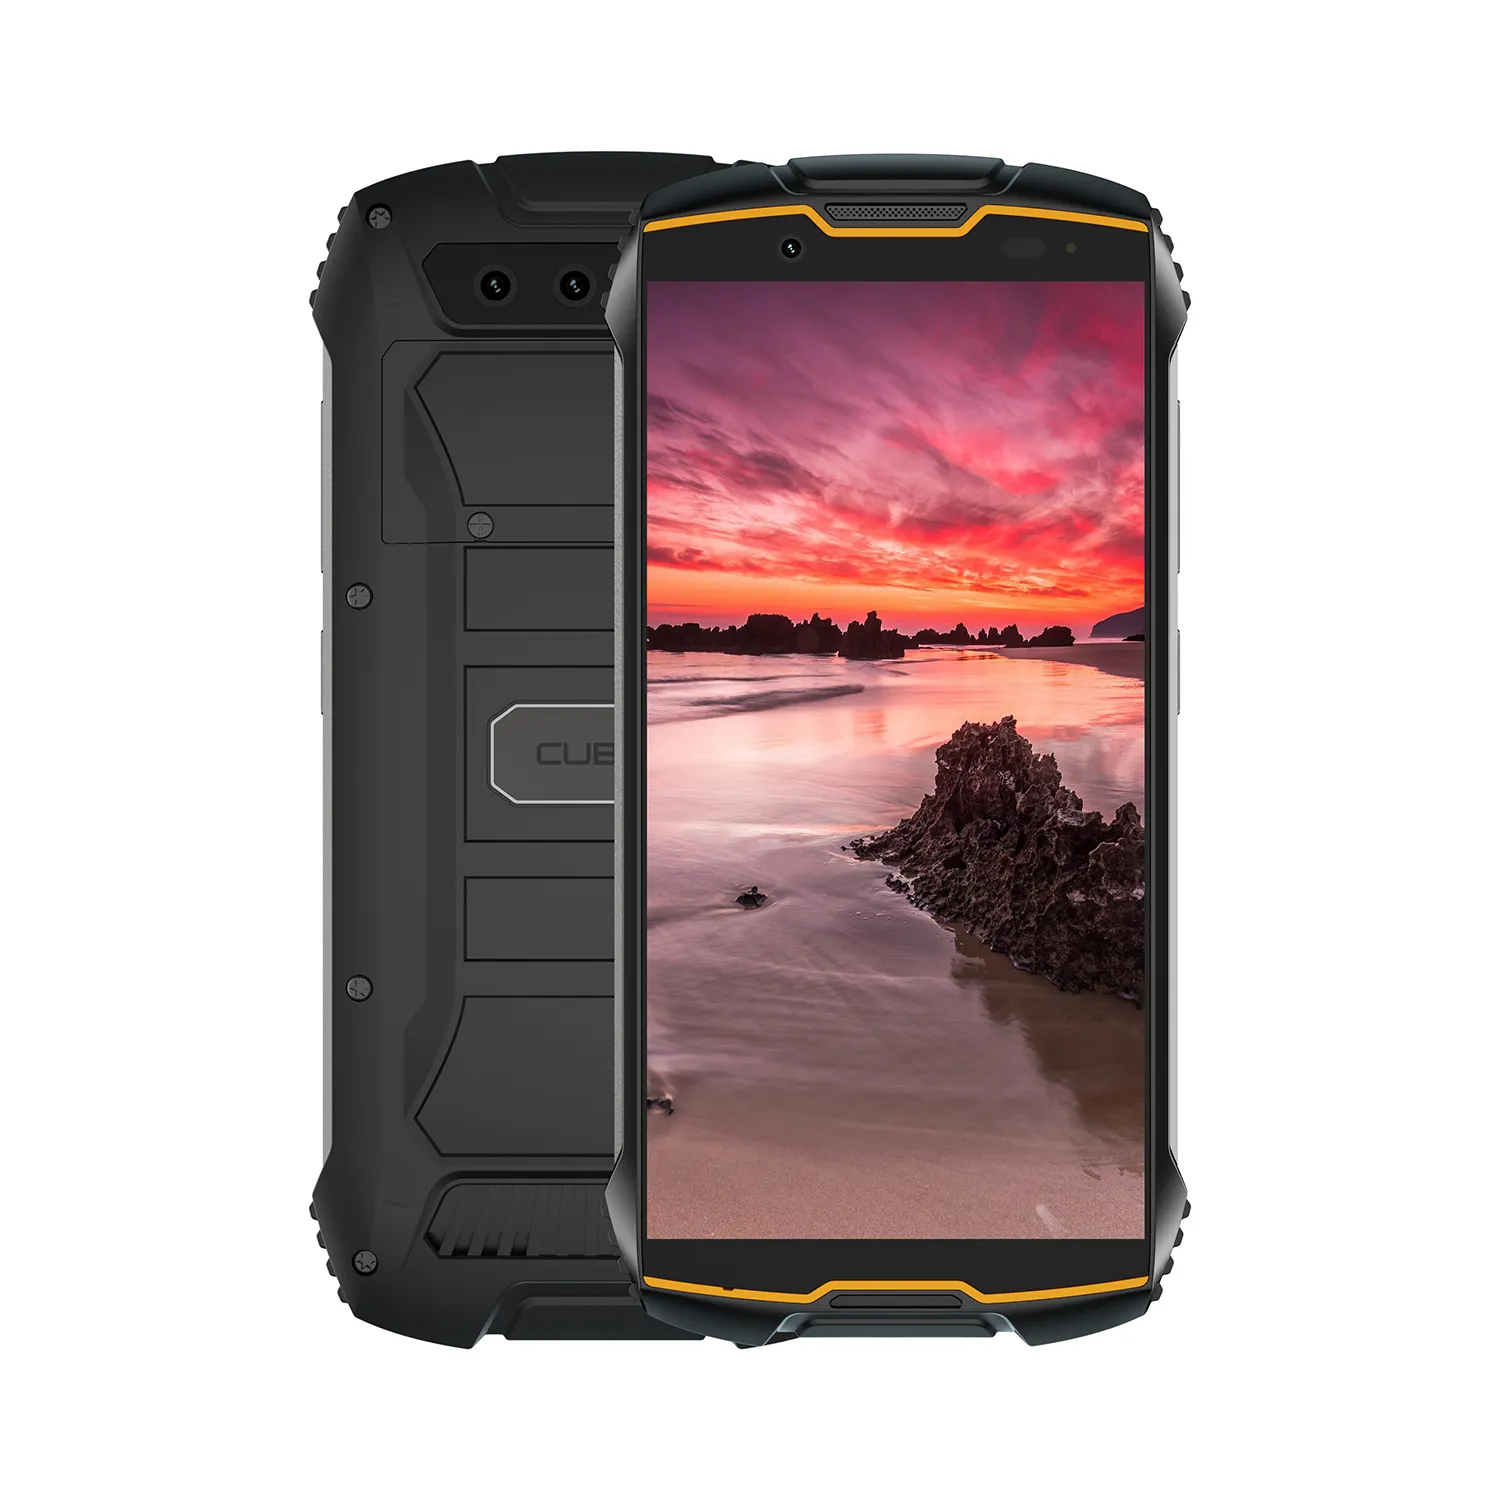 Cubot Kingkong Mini2 Pro Small Size Rugged Smartphone 4 Inch Android 11 System Octo Core 4GB Ram 64GB Rom 3000mAh Battery